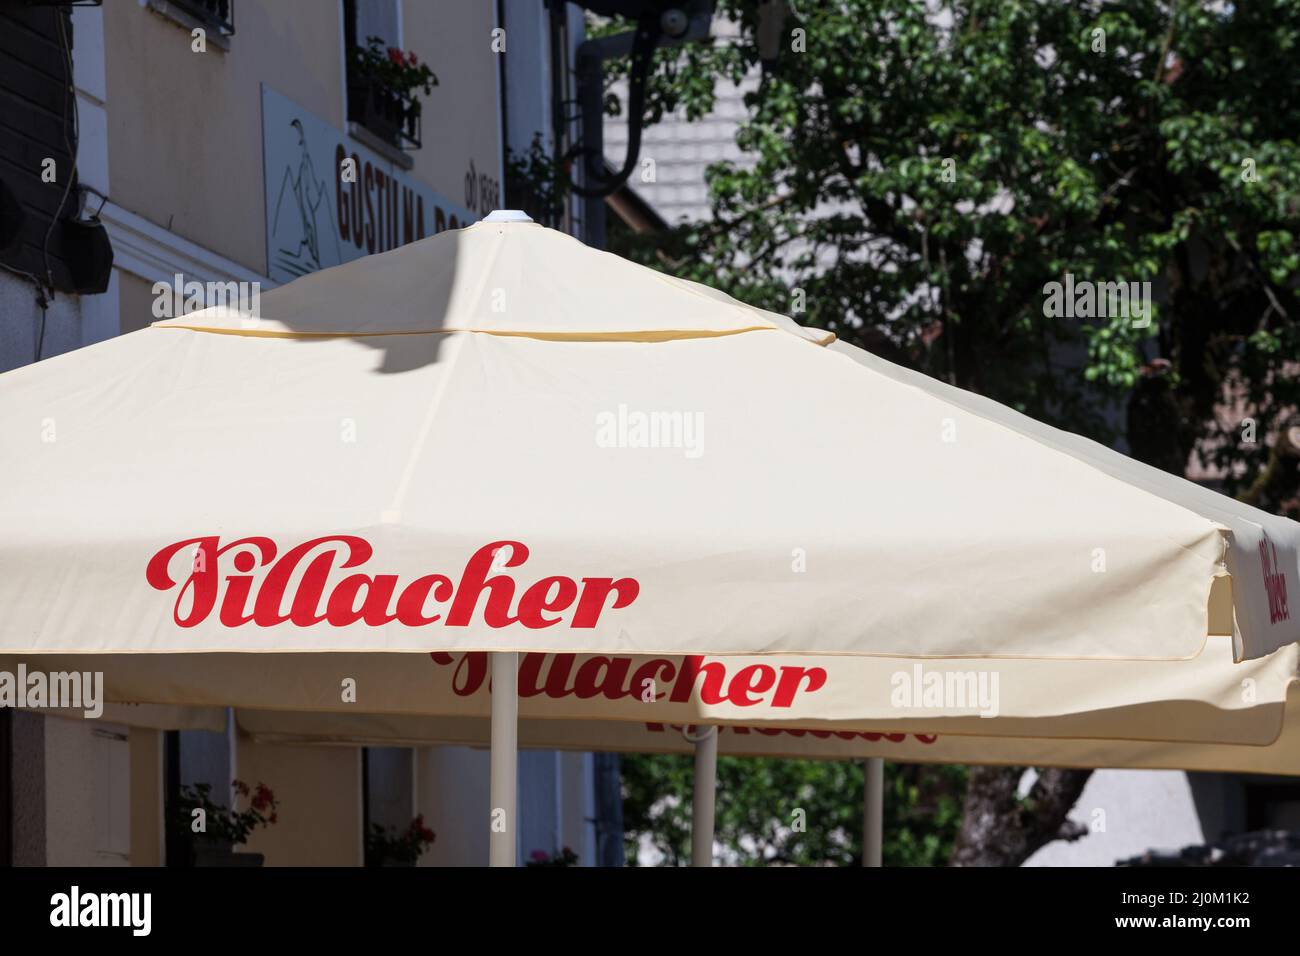 Picture of a sign with the logo of Villacher Beer taken on a cafe in Villach, Austria.  Villacher beer is the main brand of Villacher Brewery in Villa Stock Photo